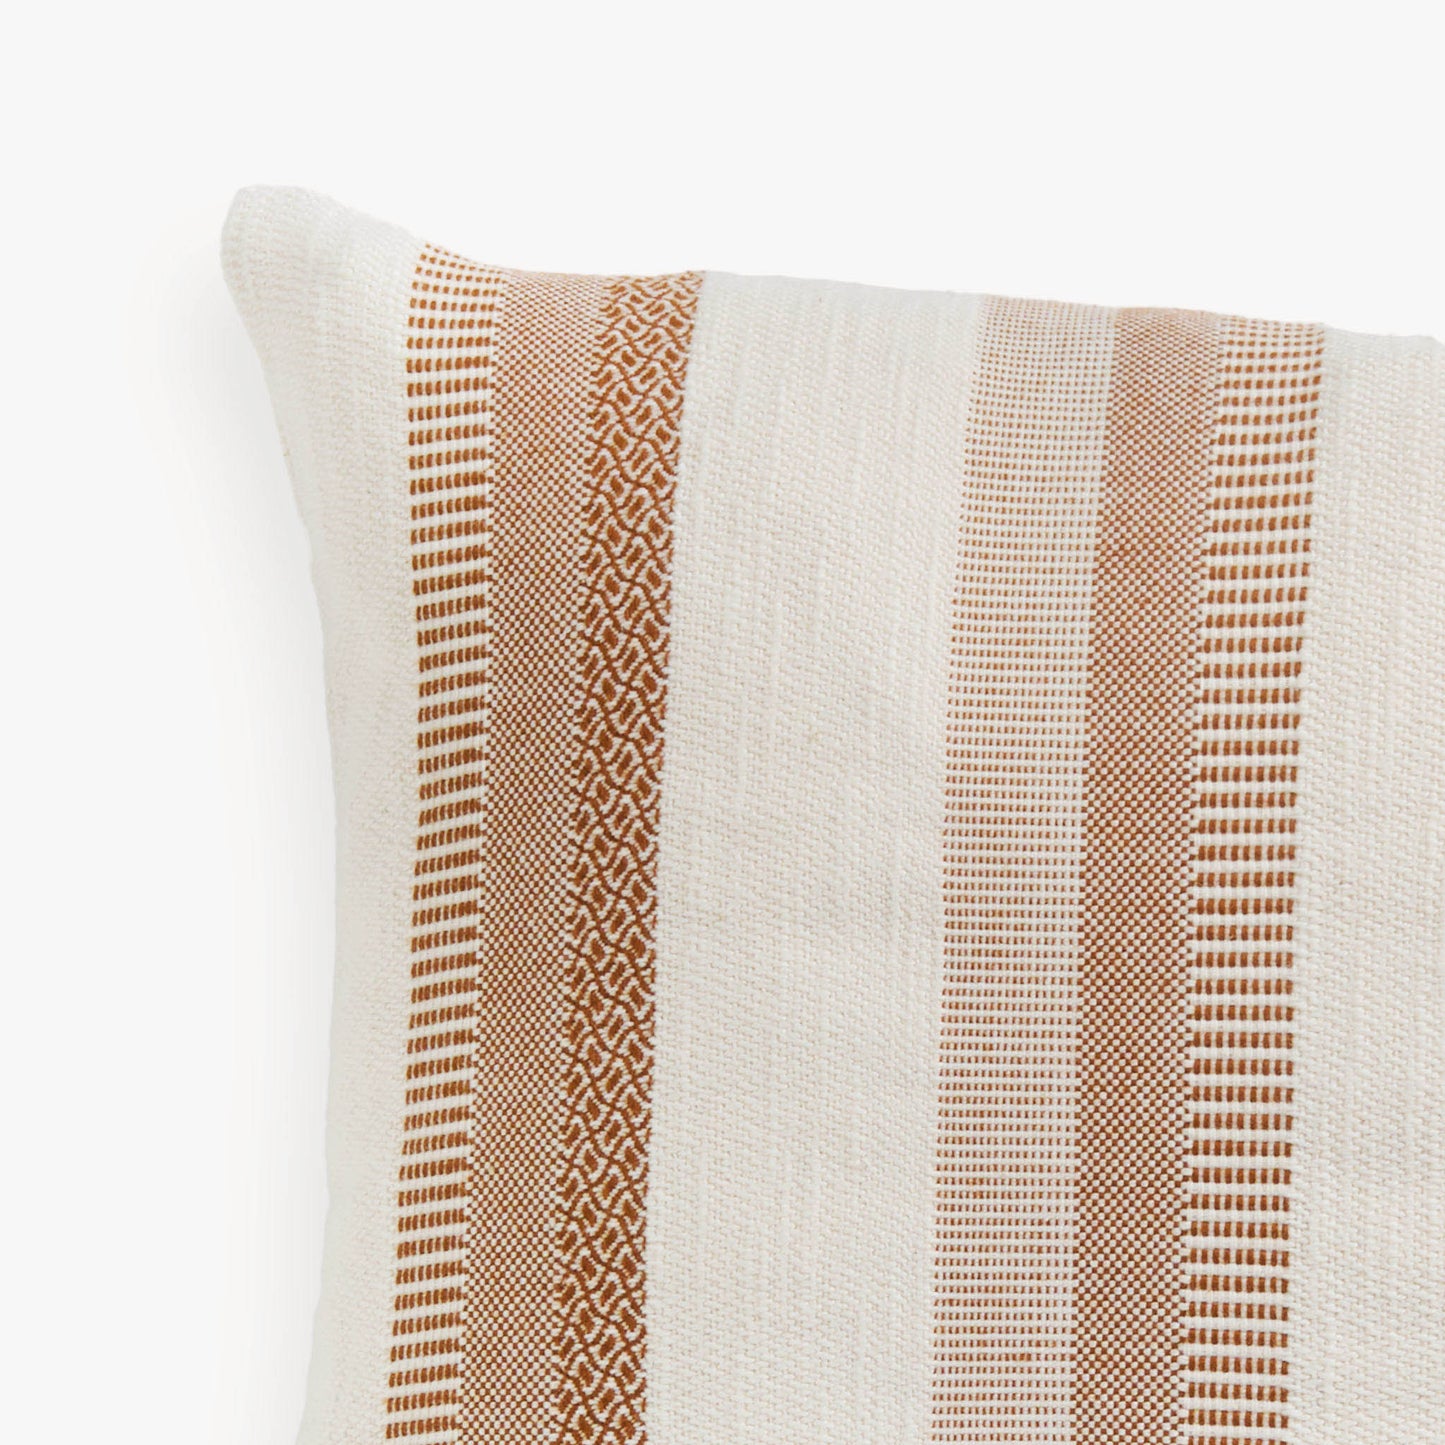 The Cabana Pillow is a gorgeous striped lumbar with an authentic, classy look and feel. 